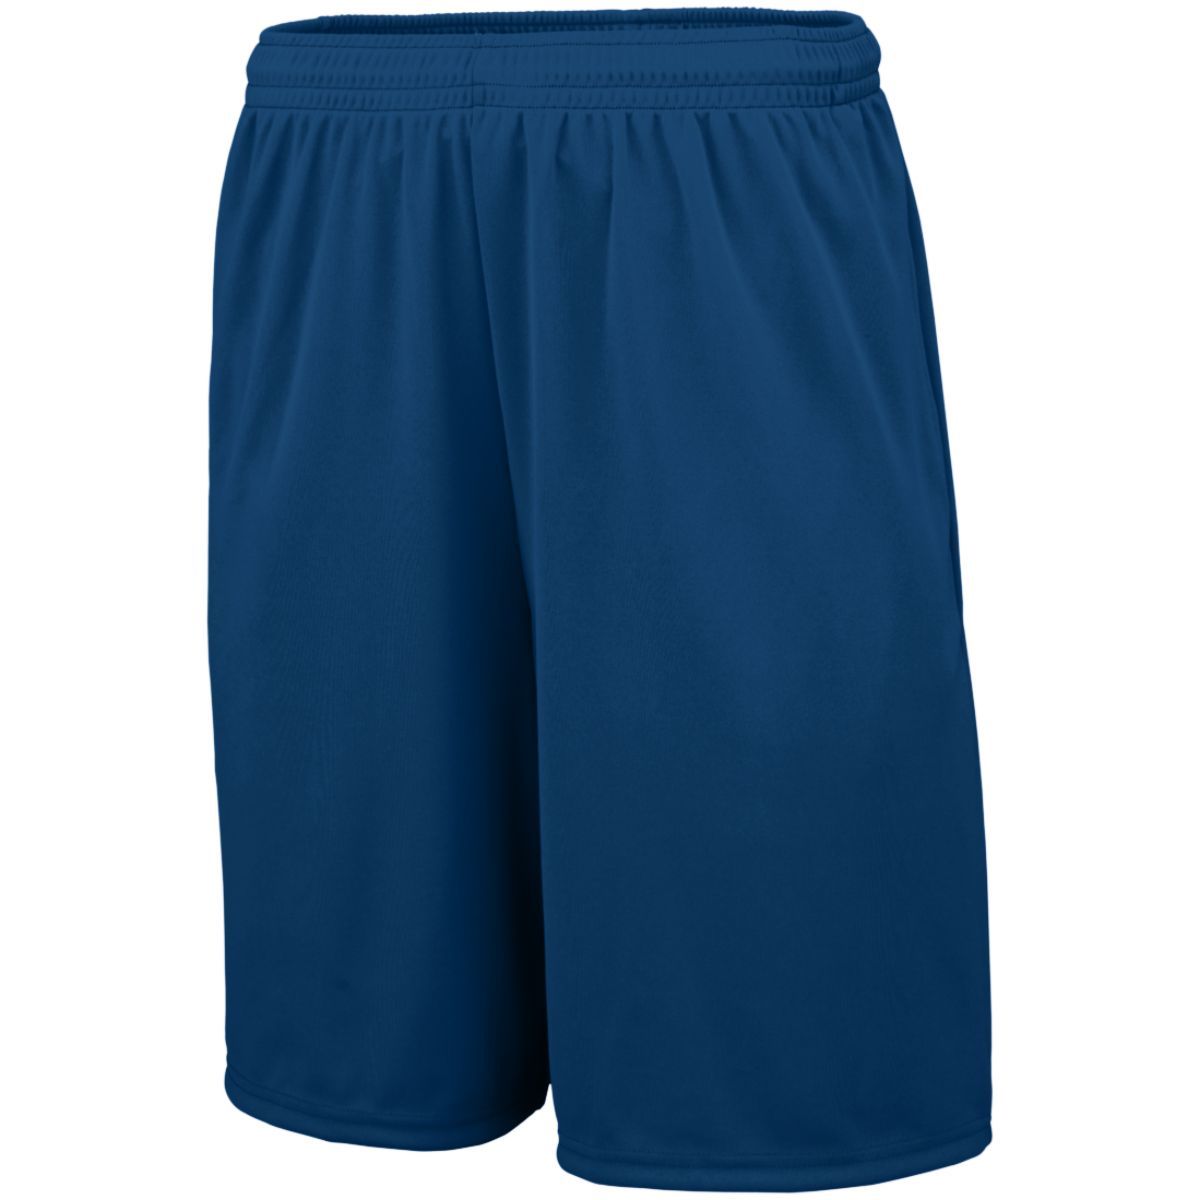 Augusta Sportswear Youth Training Shorts With Pockets in Navy  -Part of the Youth, Youth-Shorts, Augusta-Products, Lacrosse, All-Sports, All-Sports-1 product lines at KanaleyCreations.com